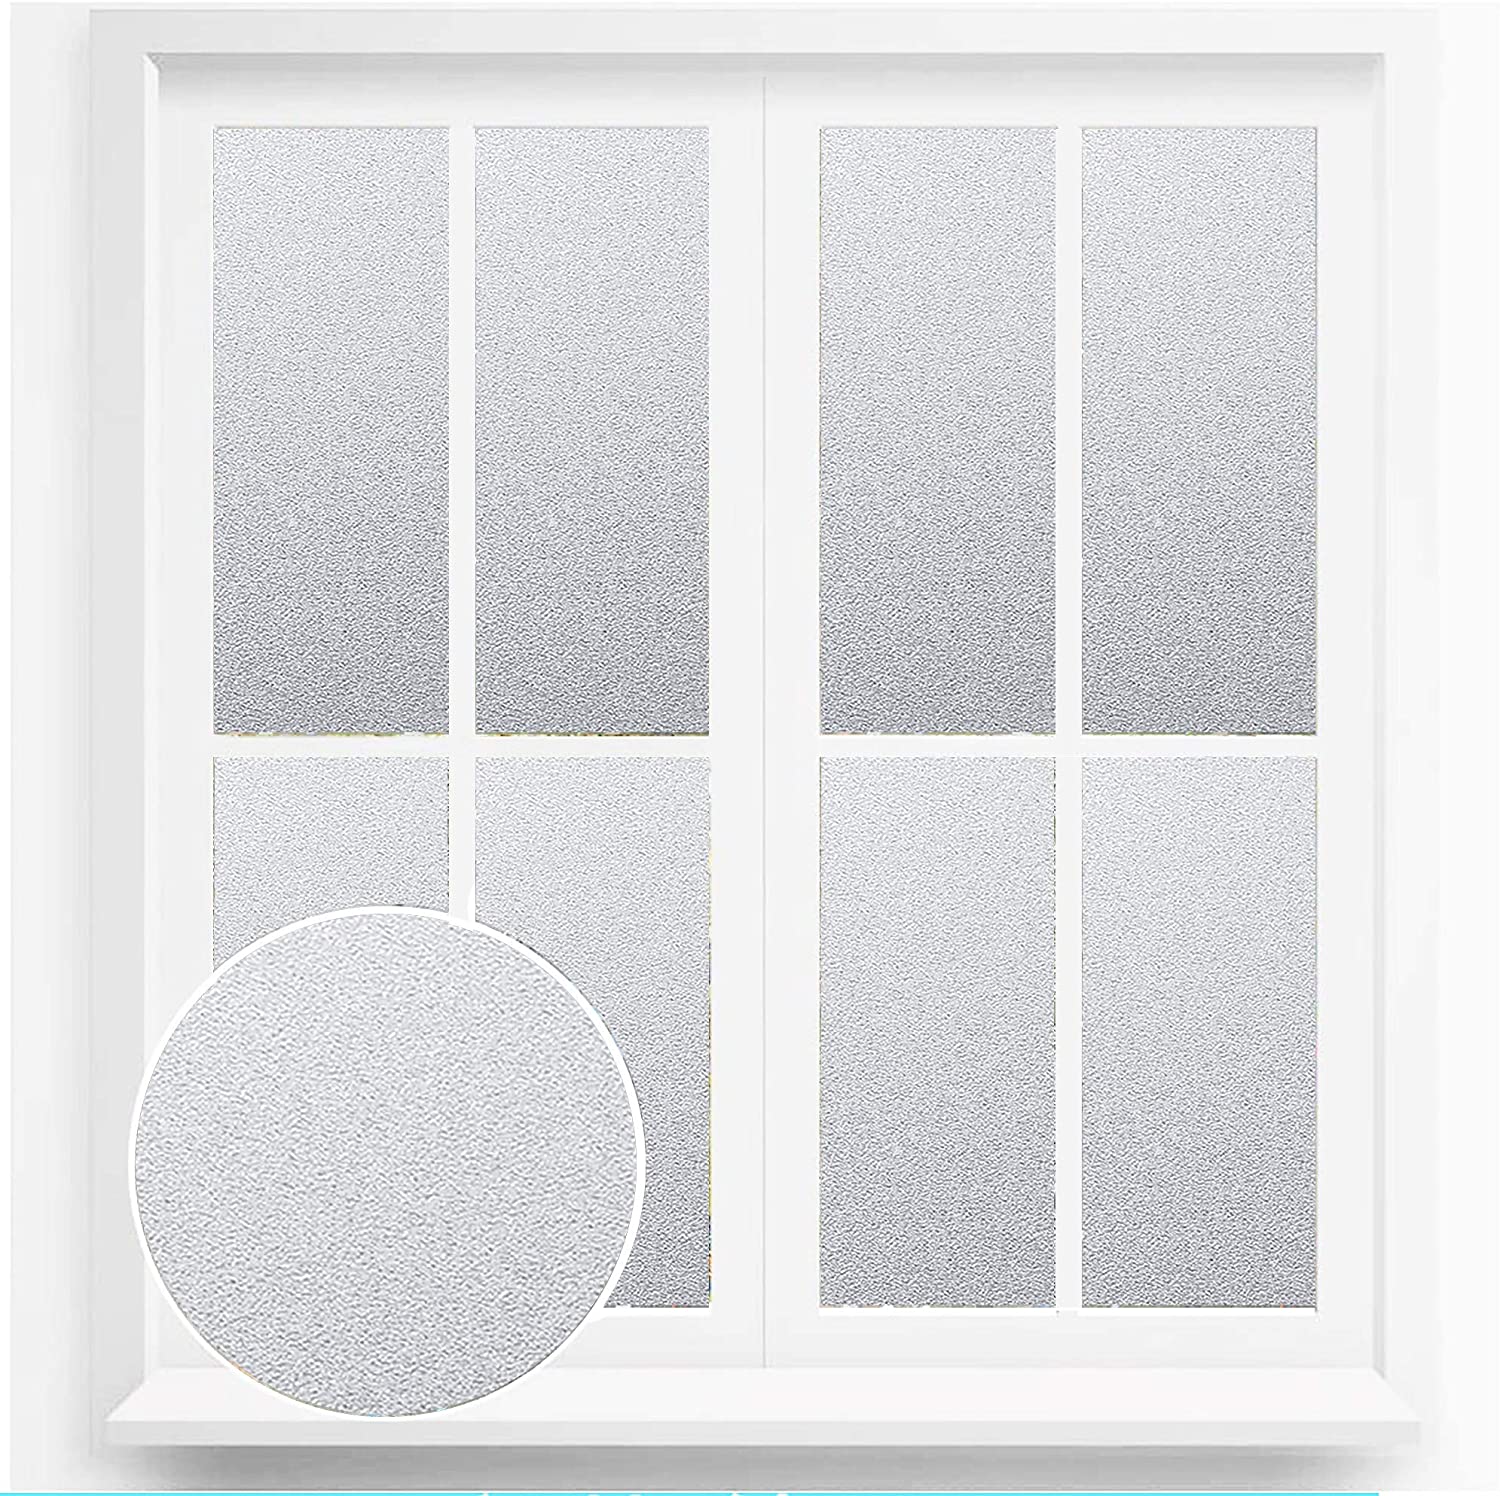 FXCIST Frosted Privacy Glass Window Film 40 x 200 cm - Opaque Privacy Sticker, Door Cover, Anti-UV Static for Office, Bathroom, Home - (Frosted, 40x200cm) 2